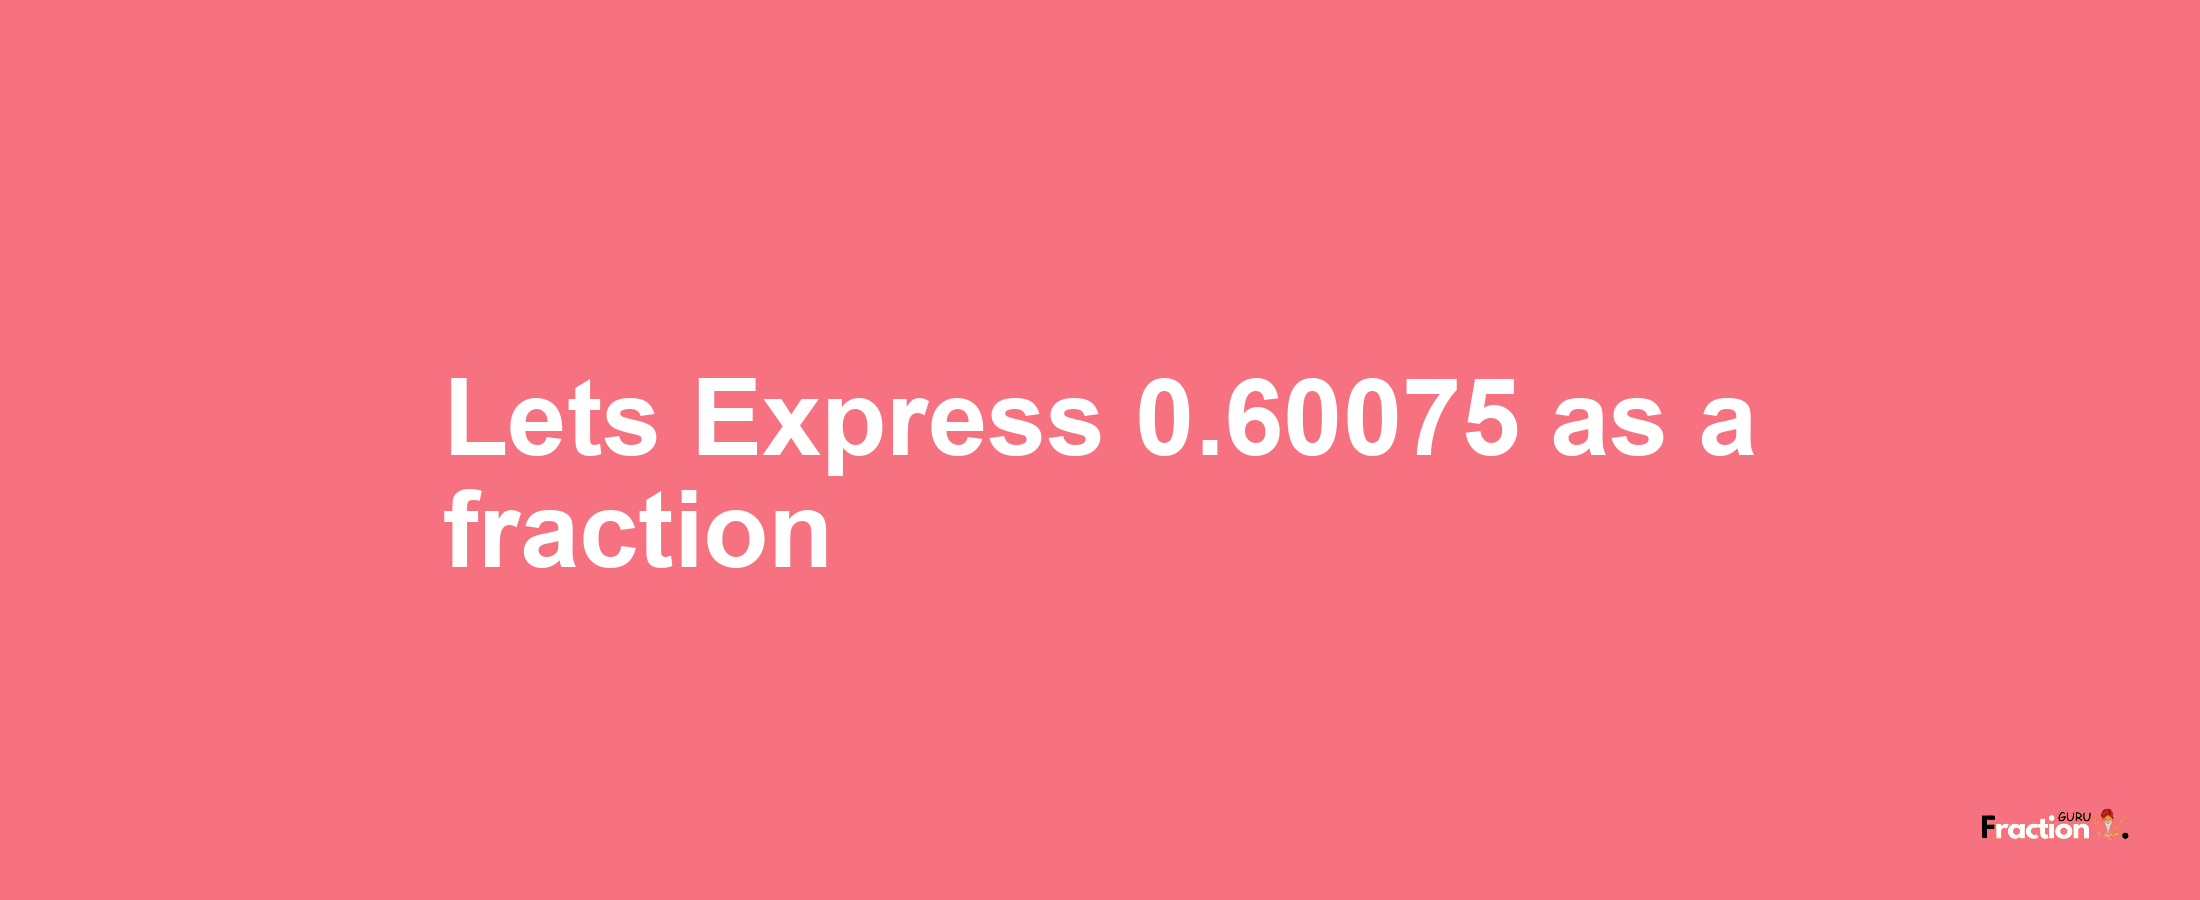 Lets Express 0.60075 as afraction